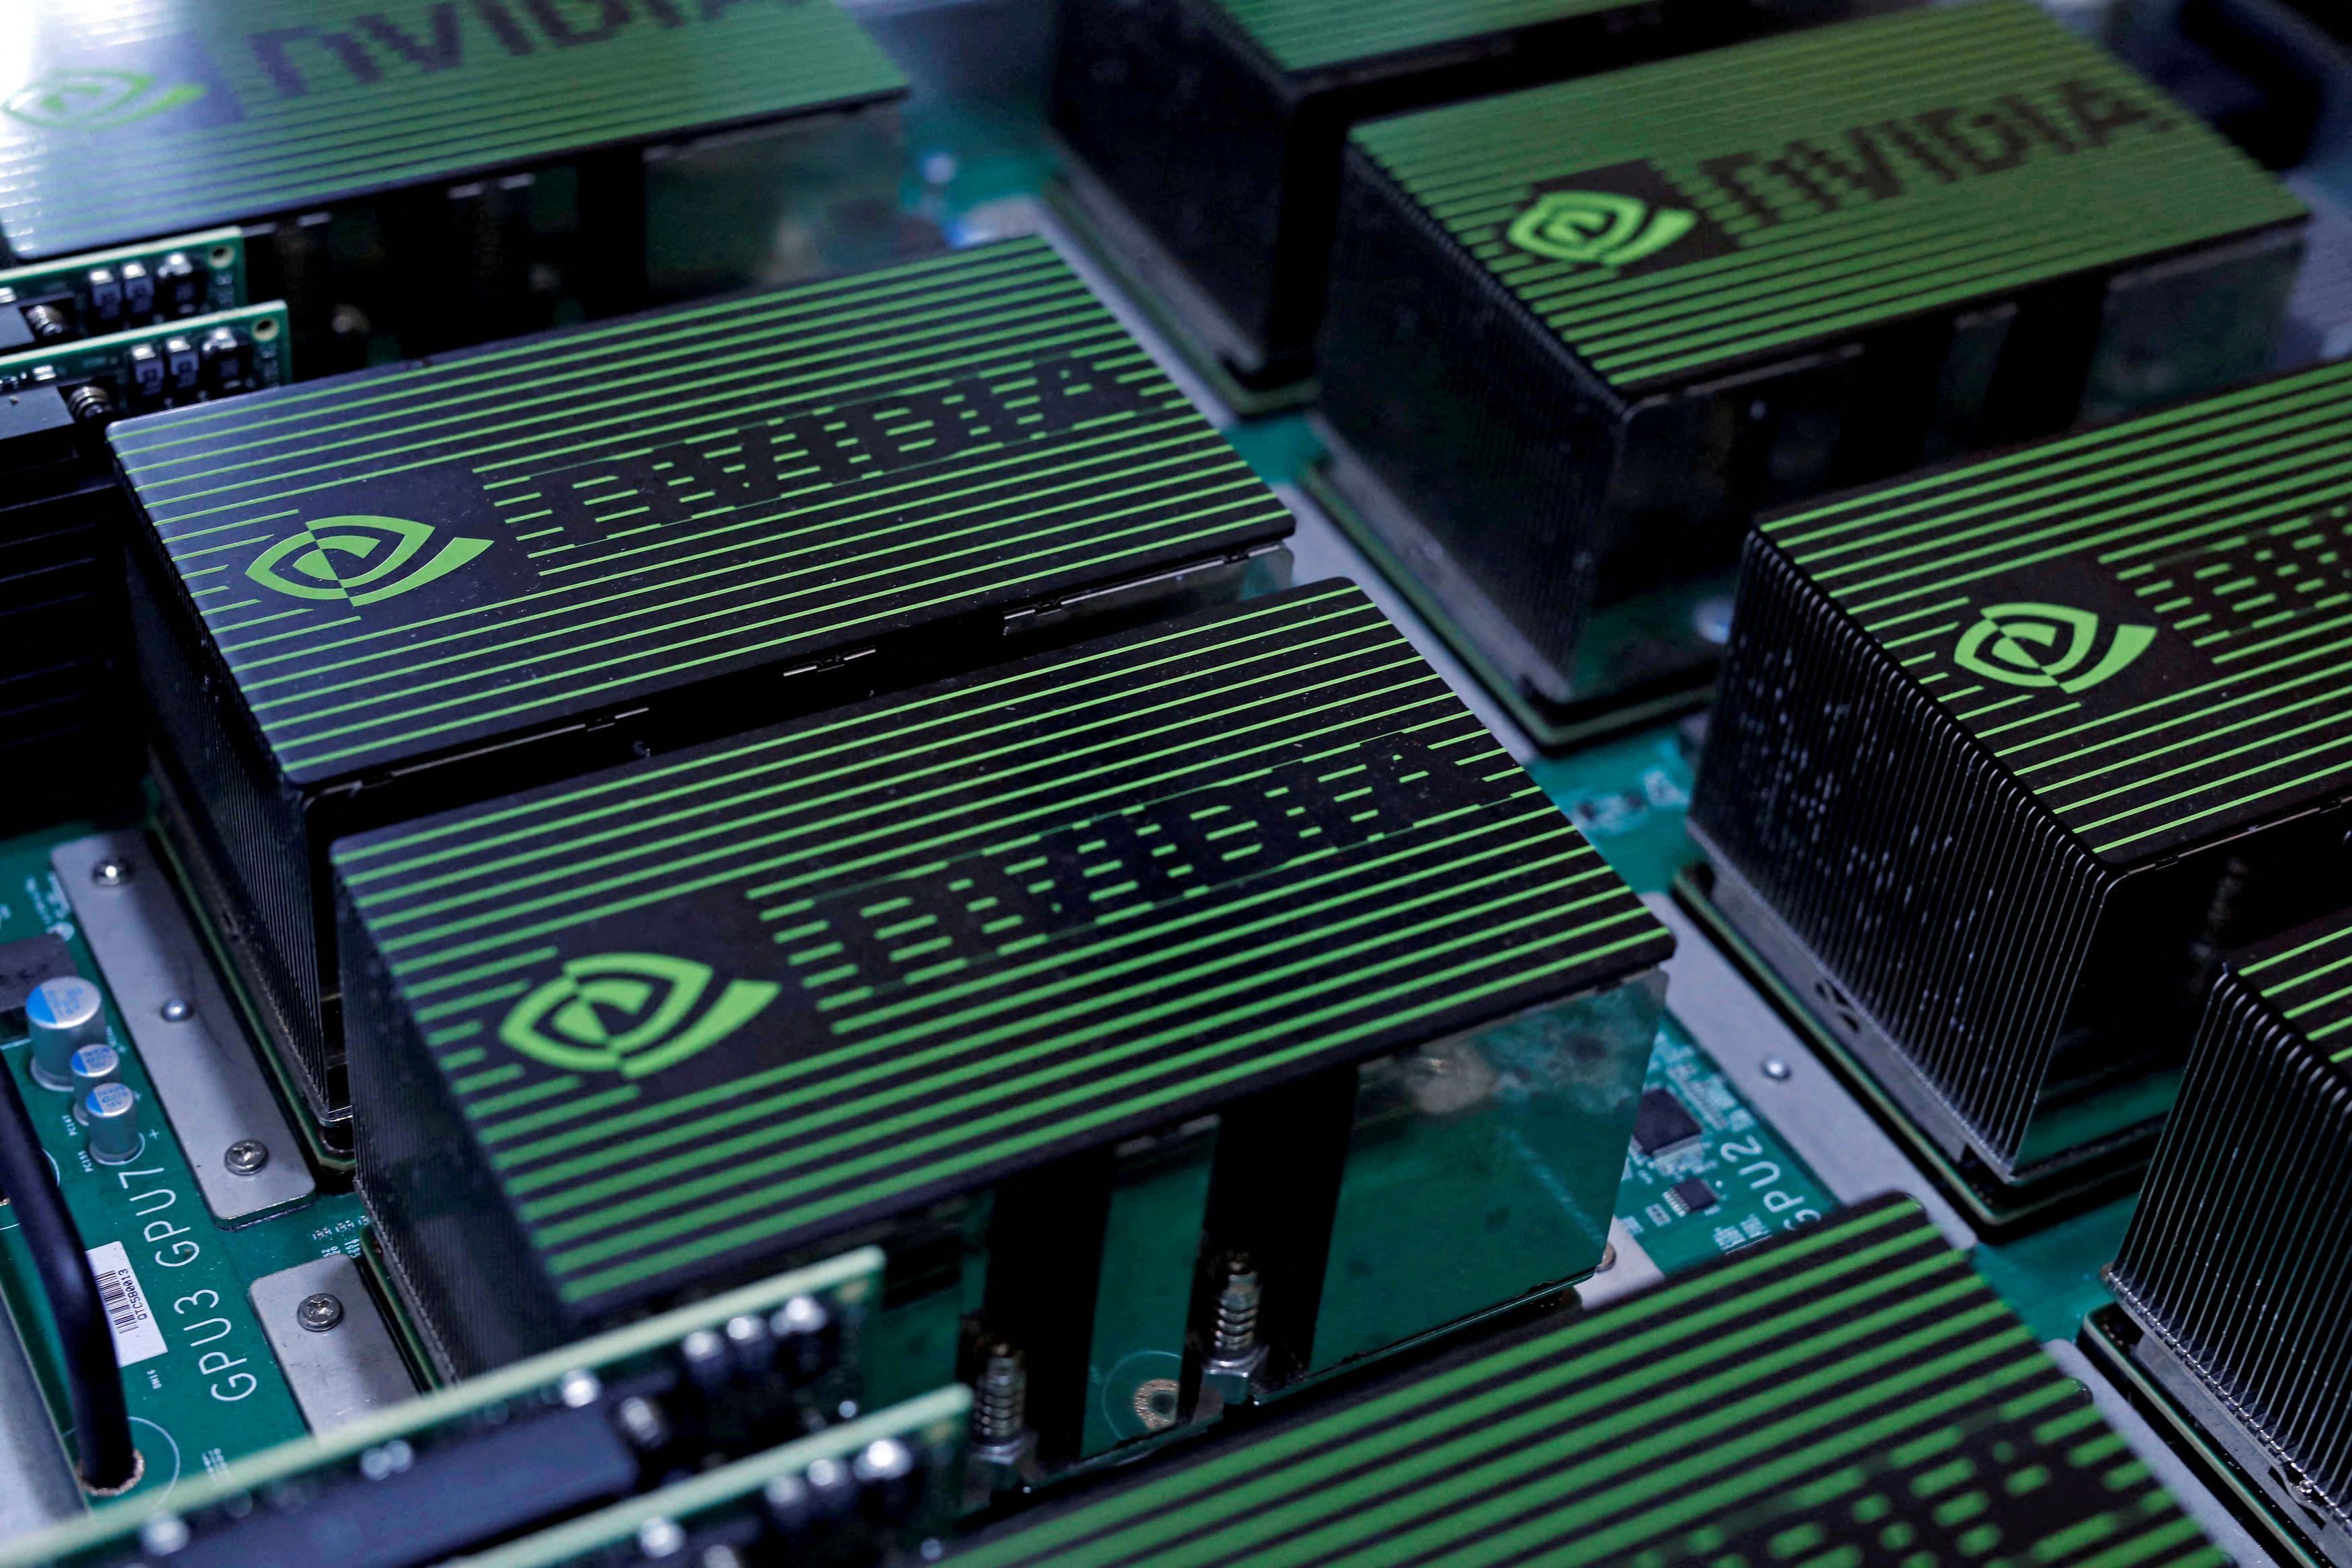 Nvidia's jaw-dropping beat and raise reinforces our 'own it, don't trade it' mantra